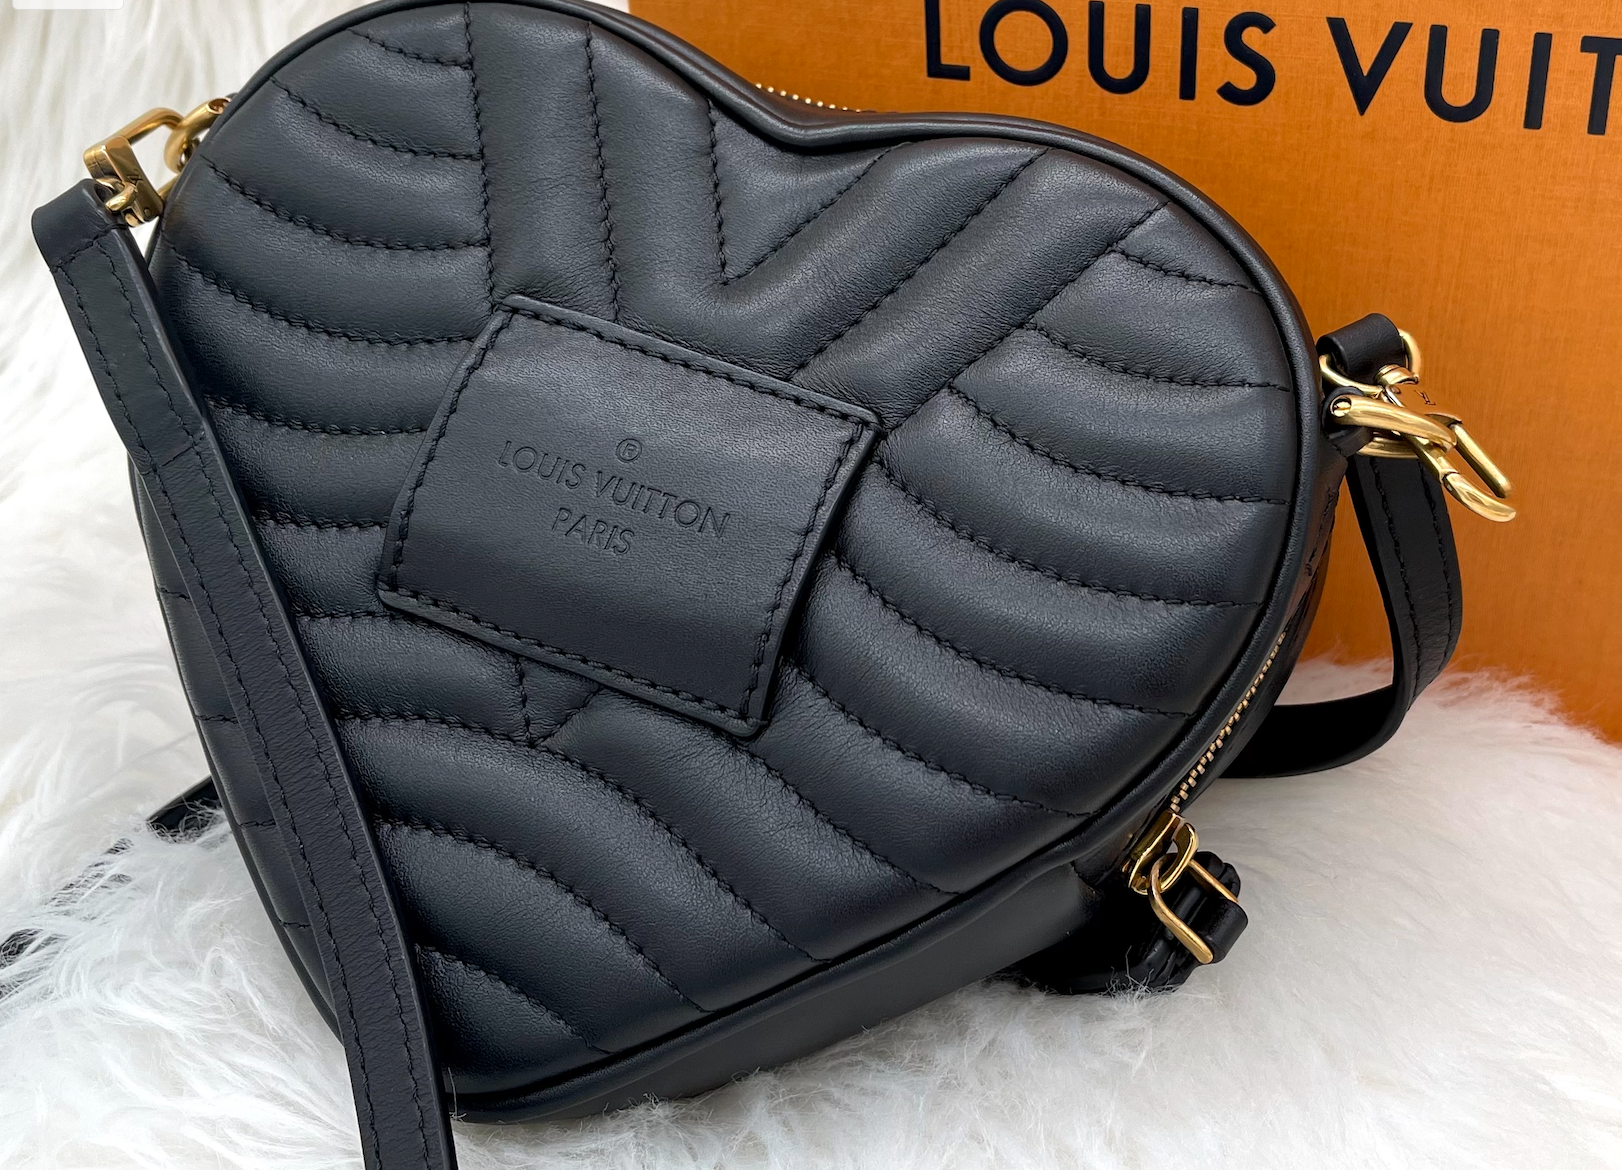 Coeur new wave leather handbag Louis Vuitton Black in Leather - 34006057